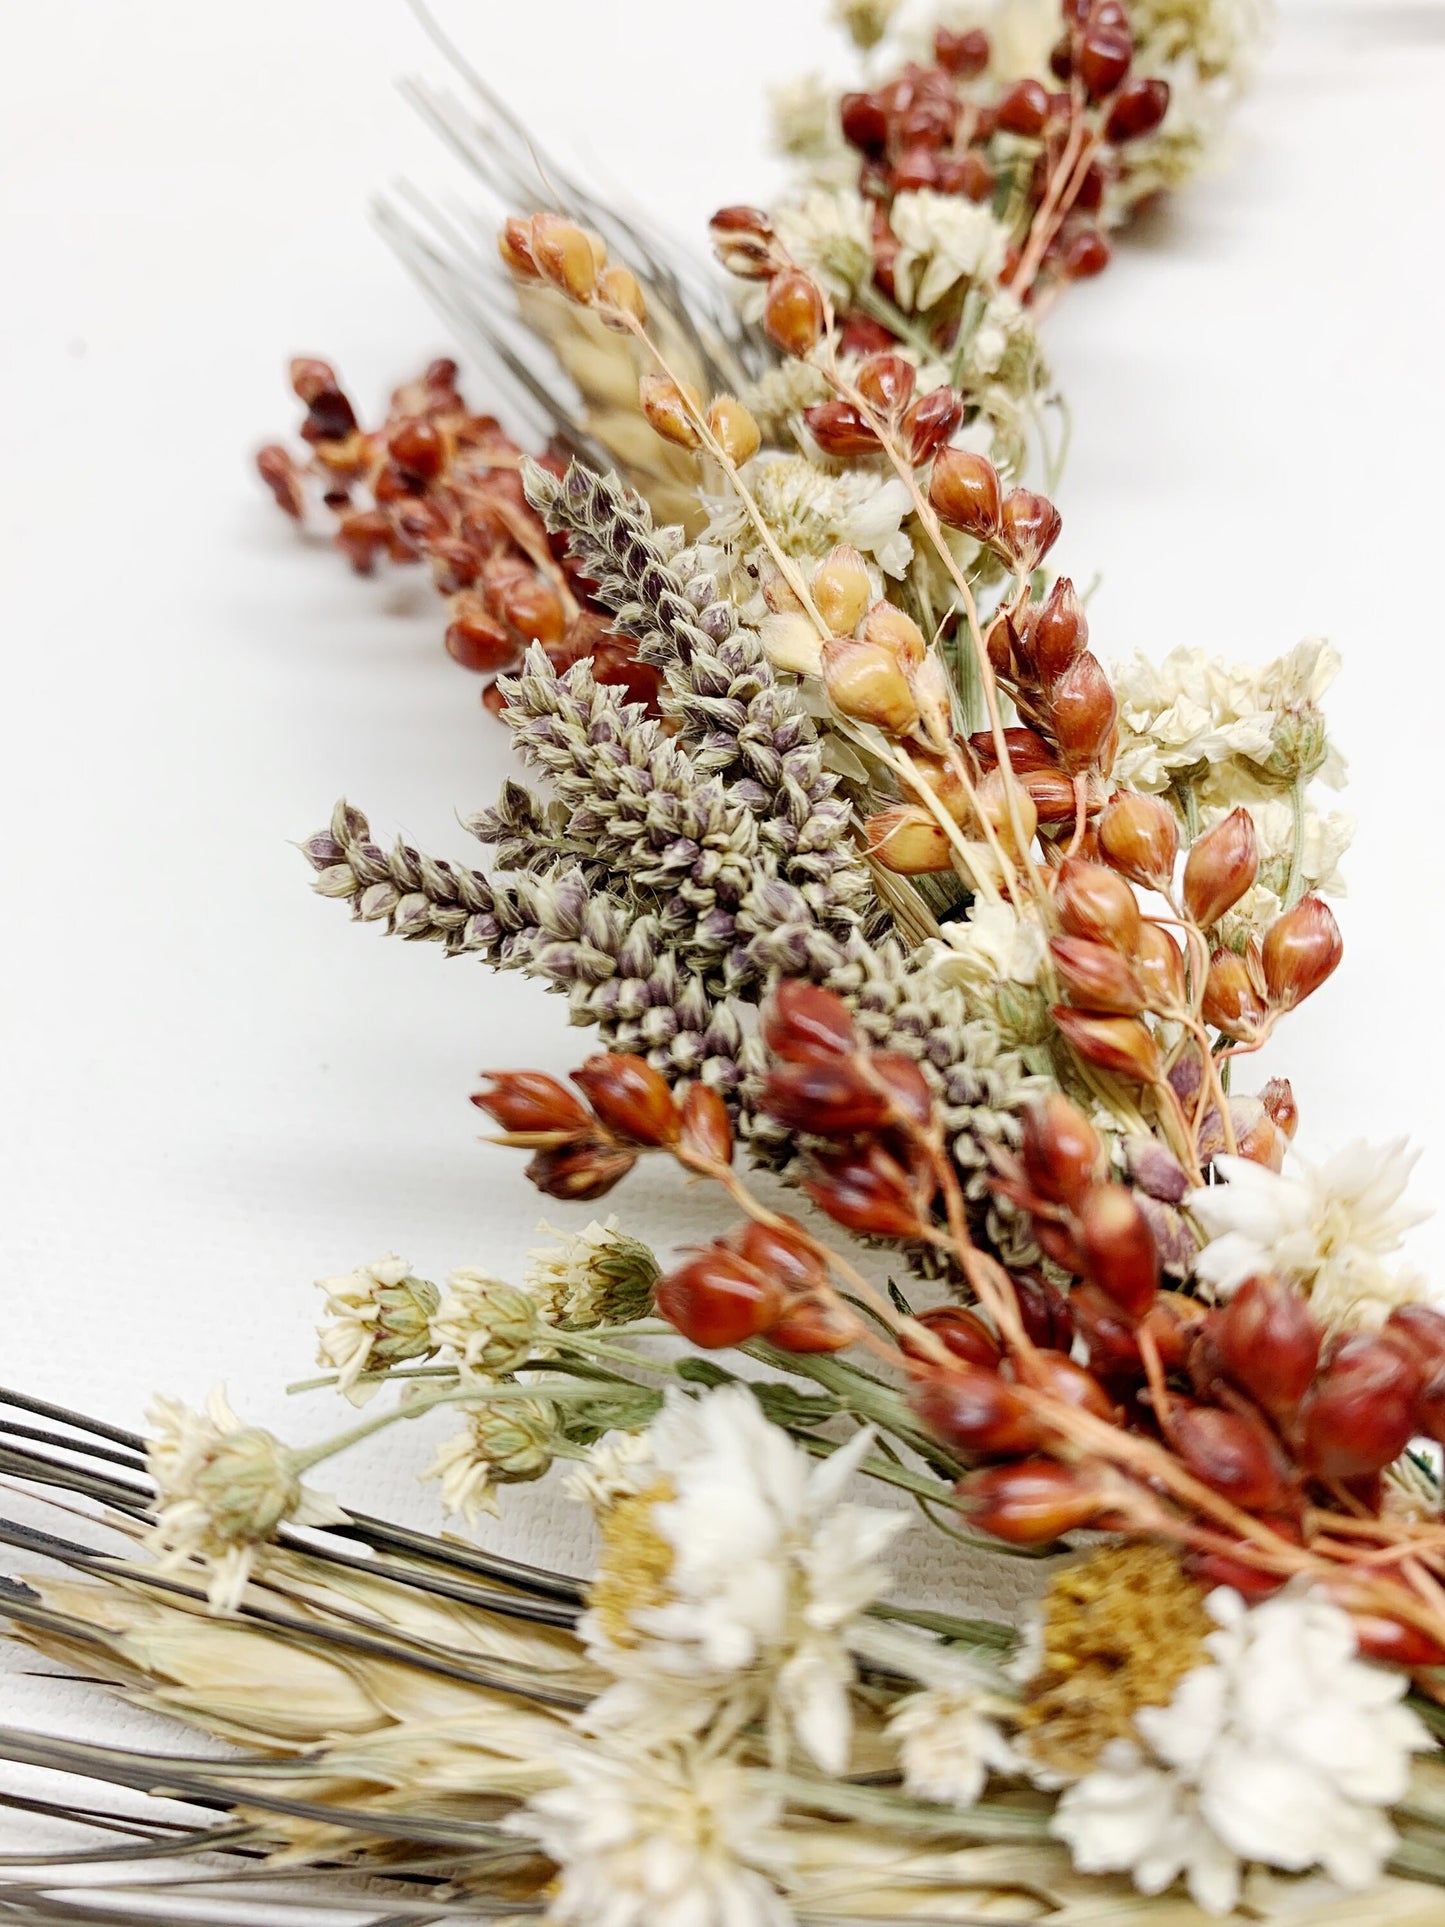 Head Wreath, Natural flowers, Dried flowers, Head band, Head Decoration, Centerpiece, Preserved Flowers, Wheat, Photoshoot Decor, Wedding